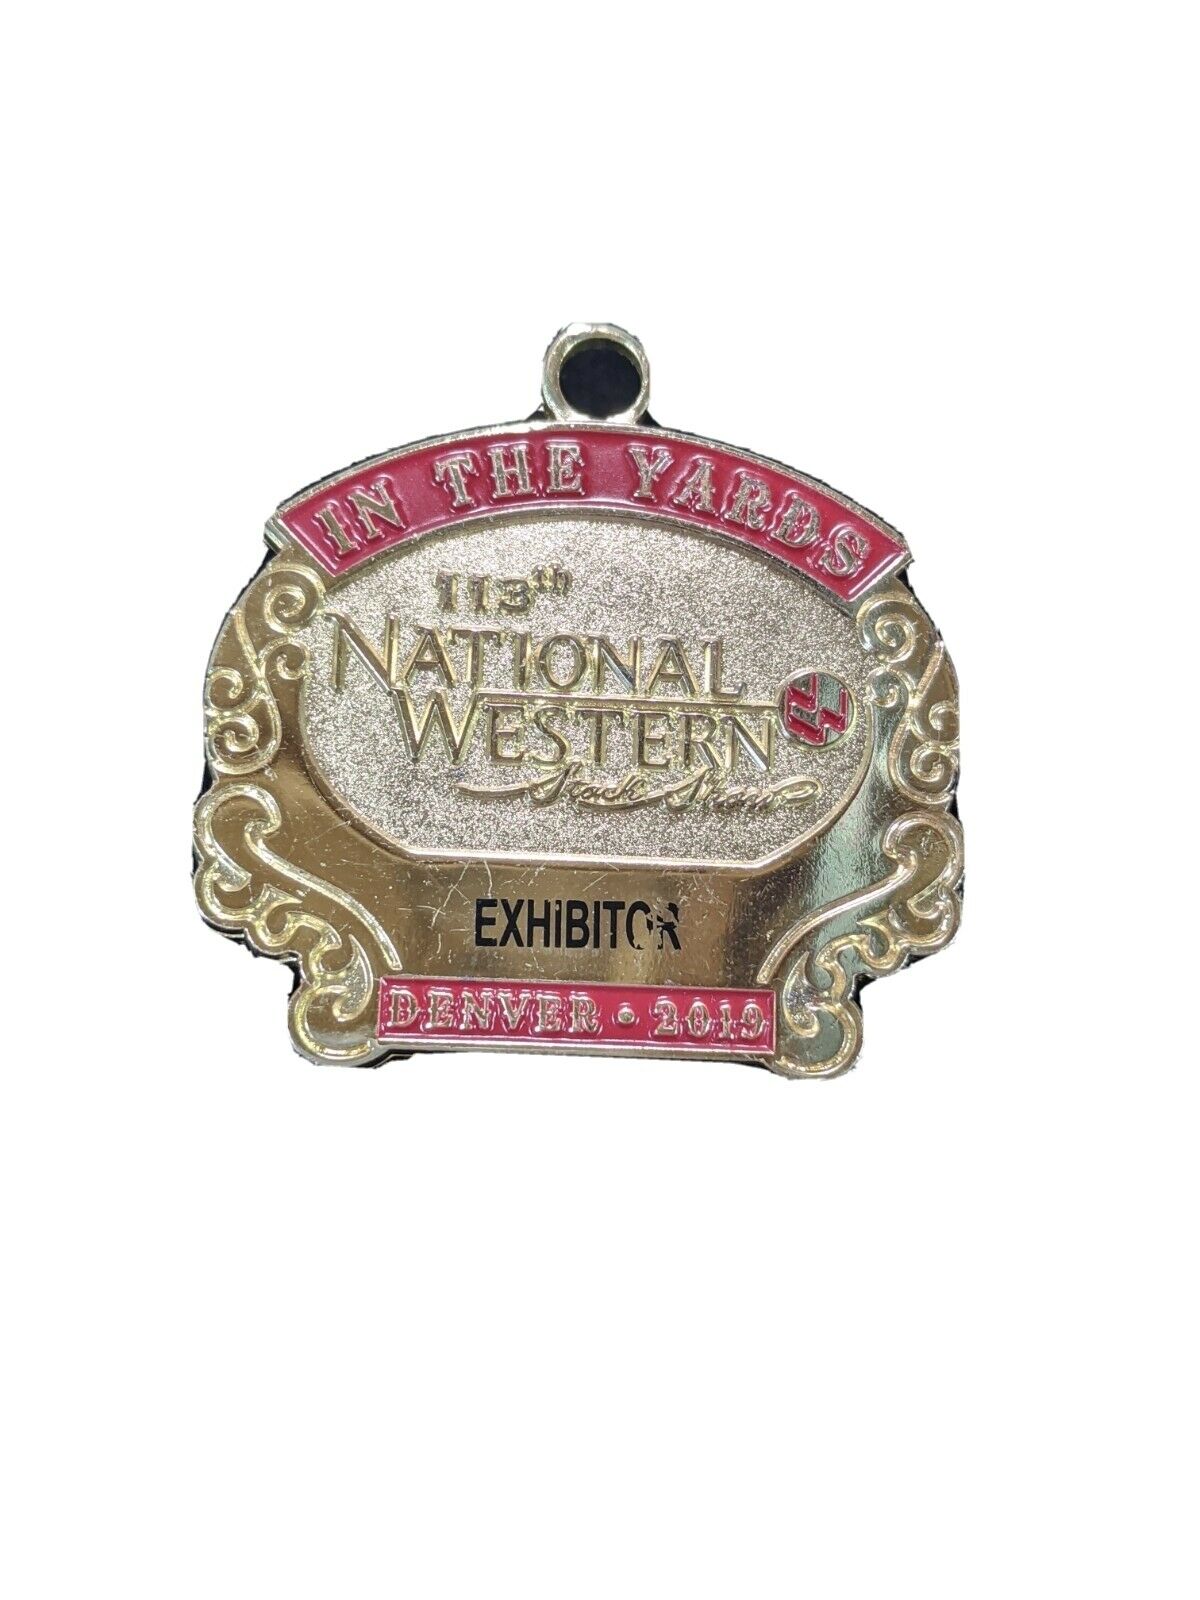 National Western Stock Show Exhibition Pin Gold Tone